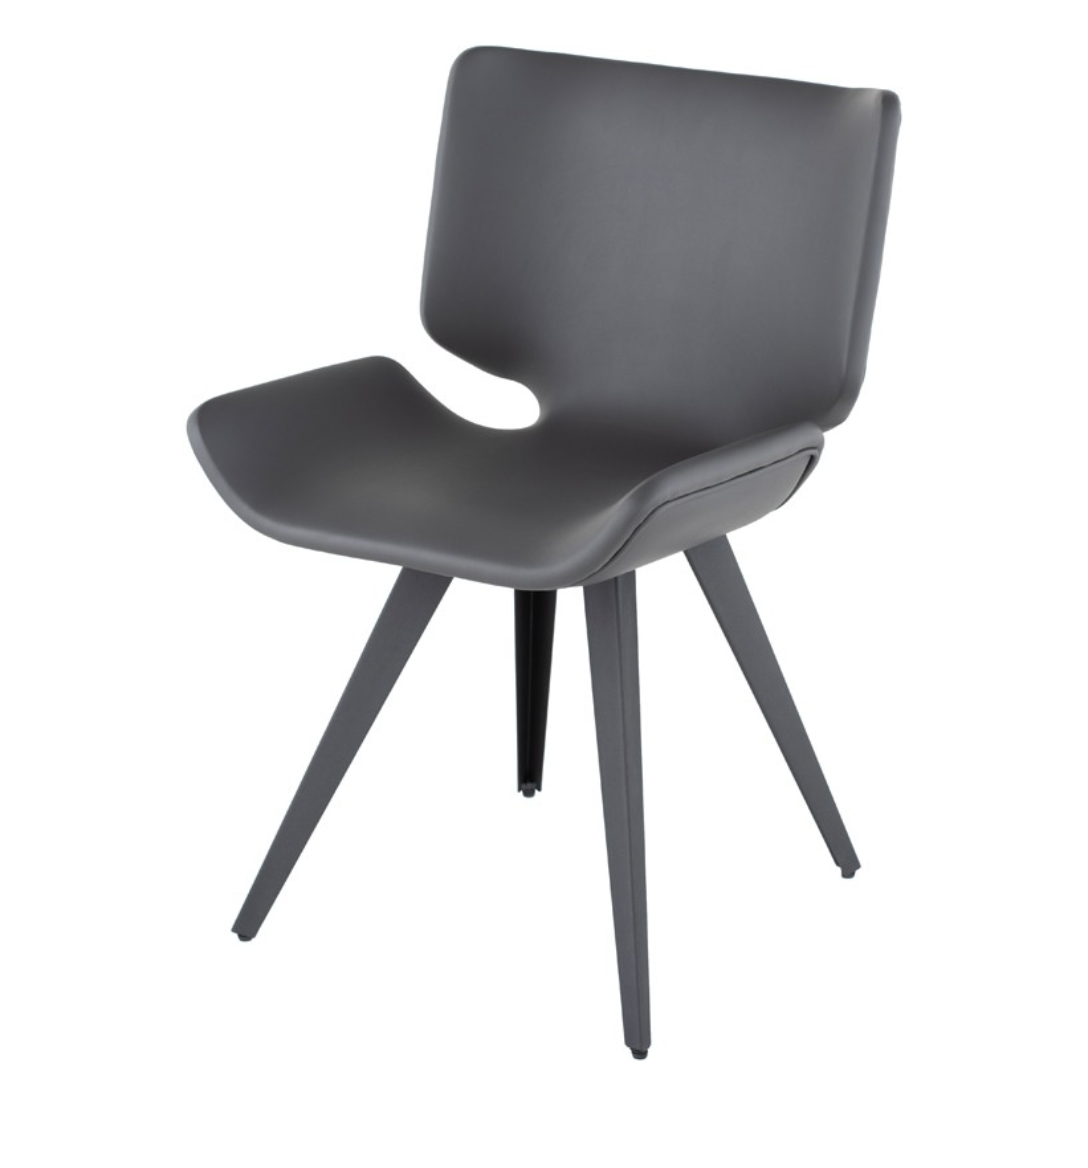 Astra Grey Dining Chair